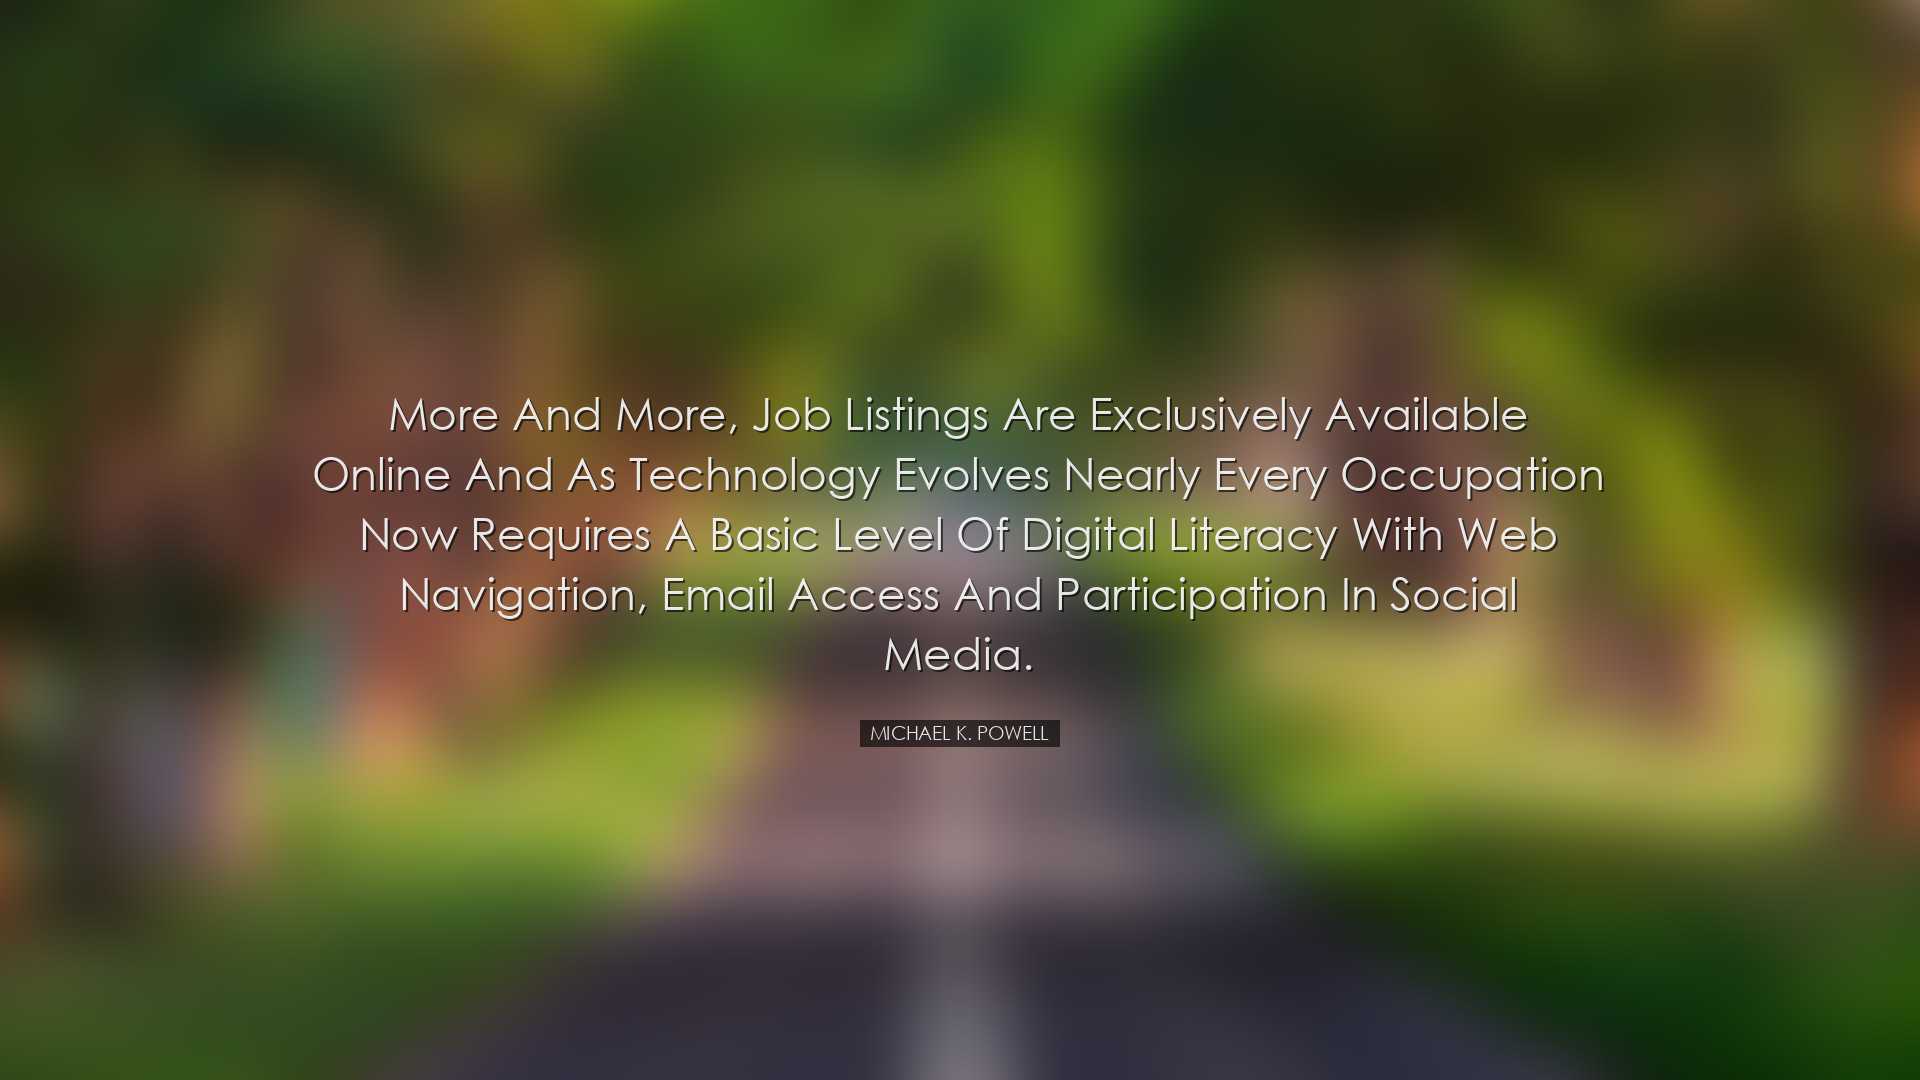 More and more, job listings are exclusively available online and a